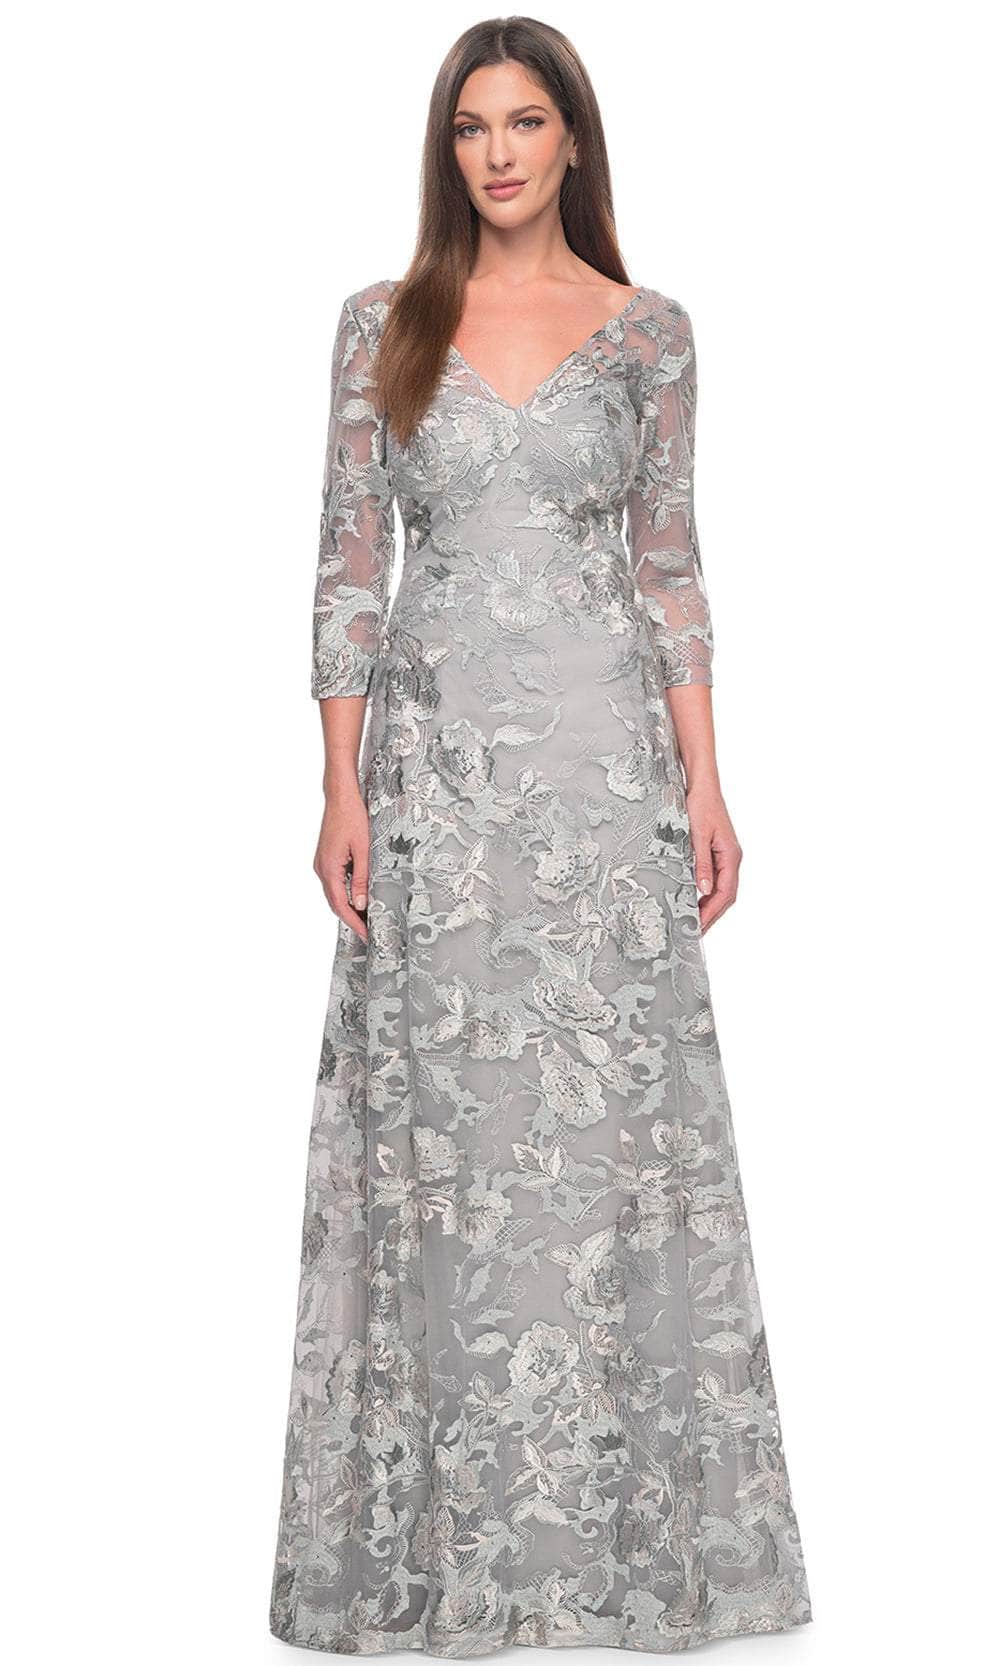 La Femme 30062 - Embroidered Quarter Sleeve Prom Gown
